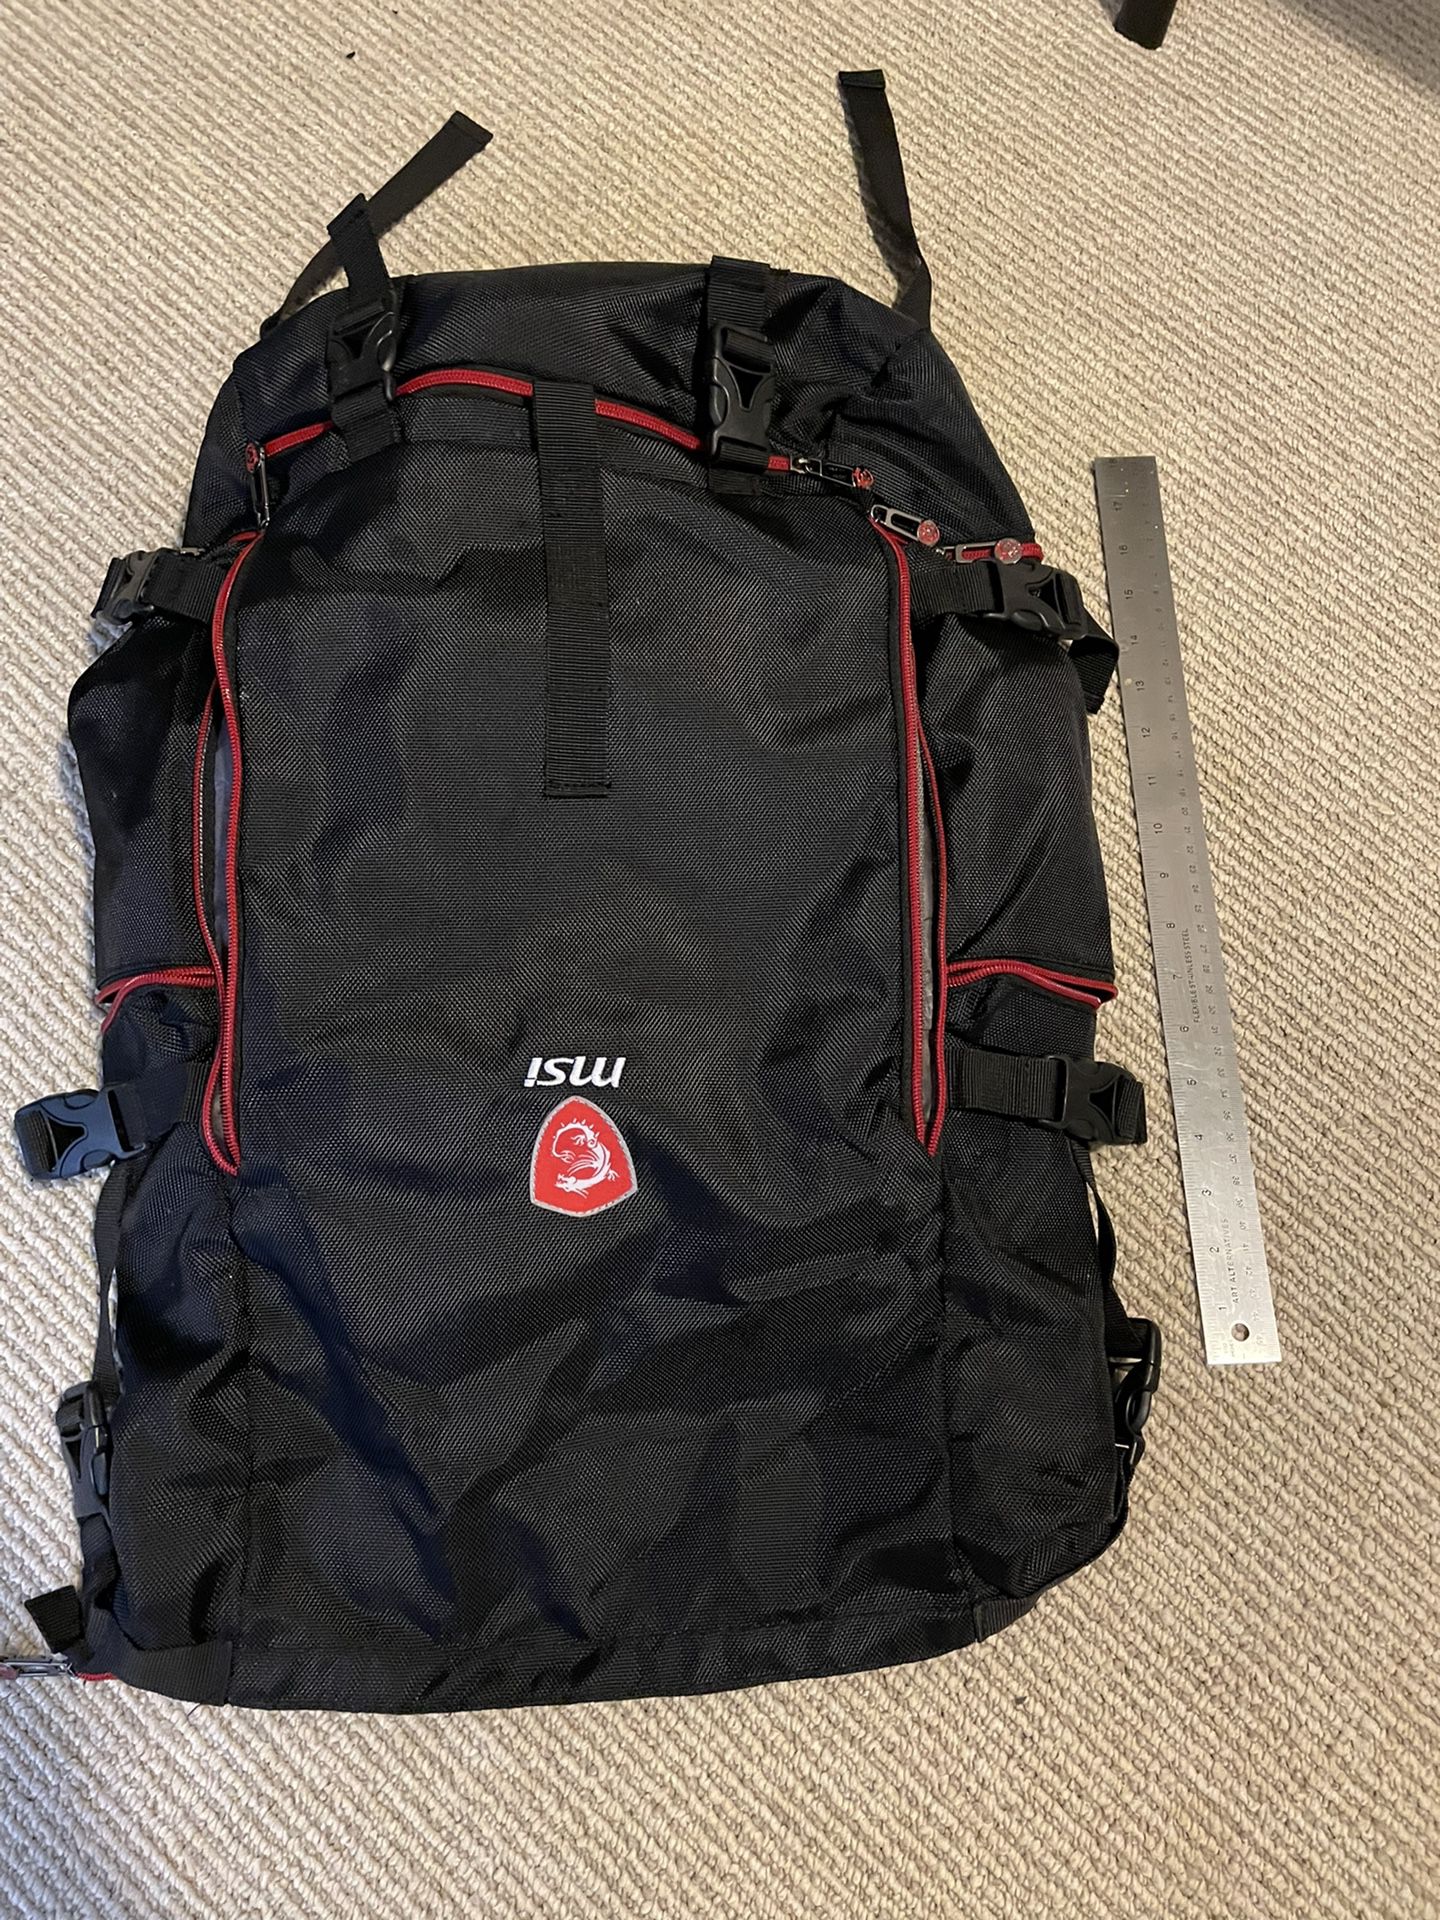 Msi Backpack With Msi Stickers 